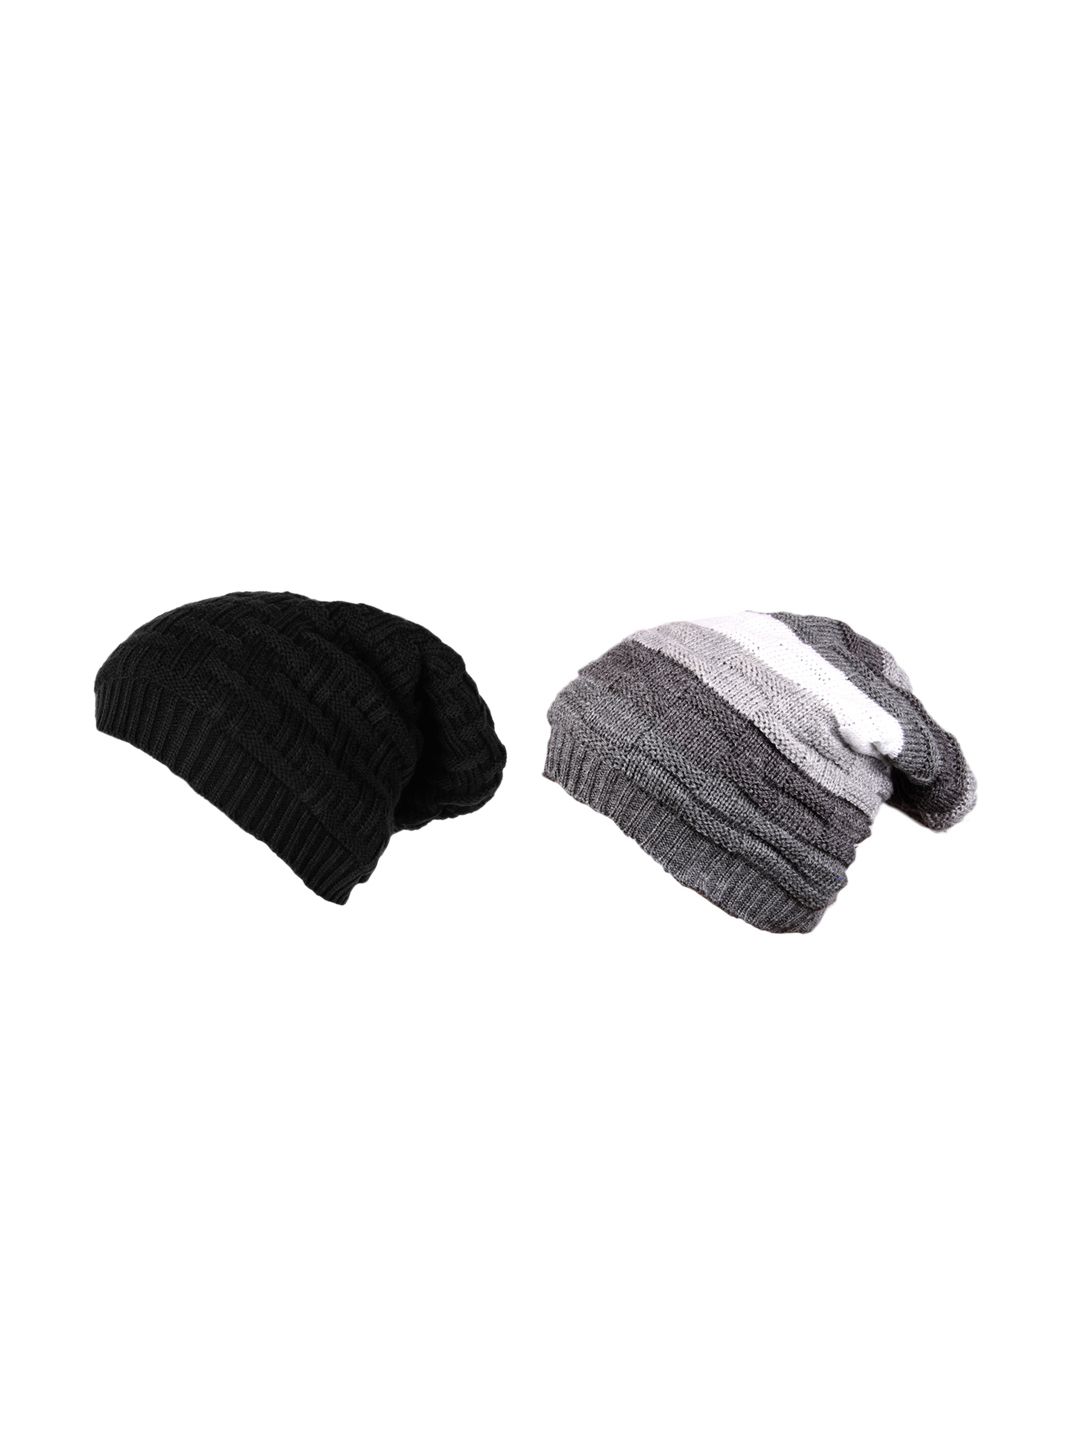 Knotyy Pack of 2 Unisex Black & Grey Colourblocked Beanie Price in India